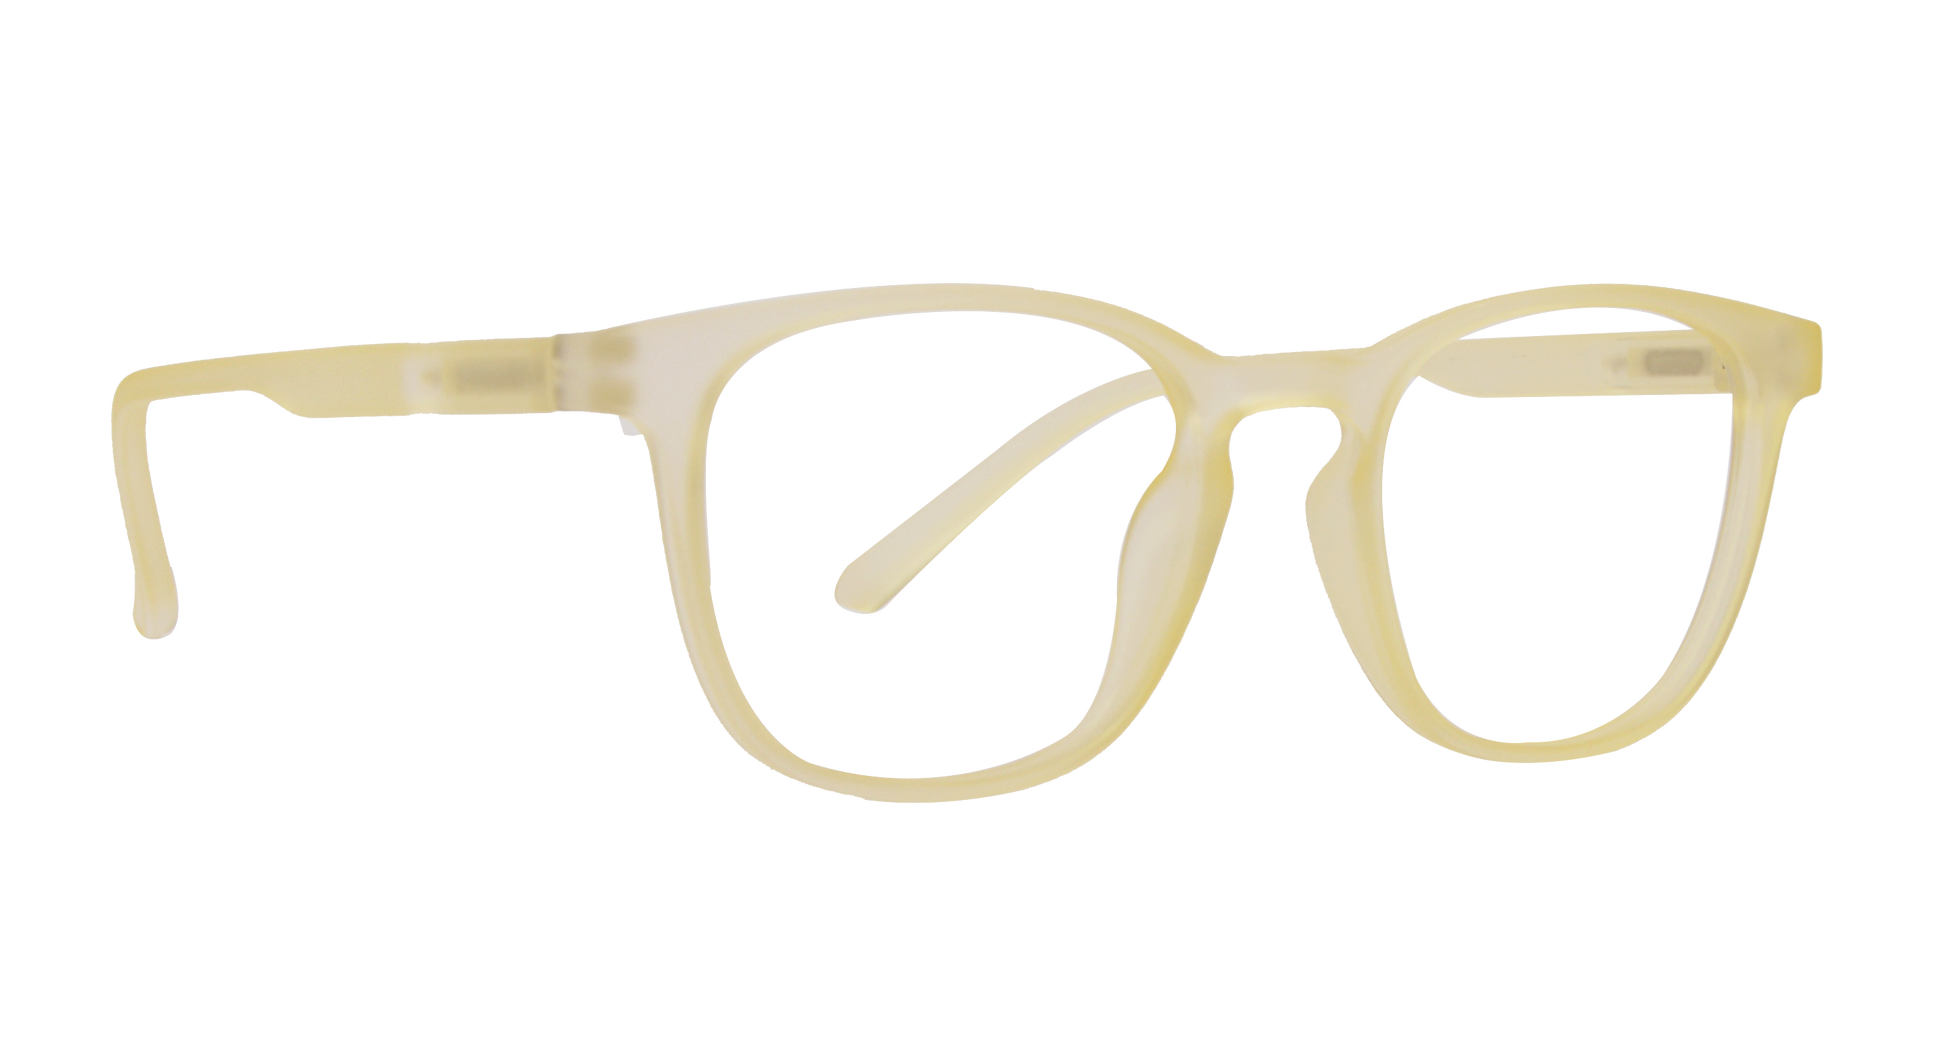 The image depicts a pair of yellow reading glasses on a black background. The glasses are the central focus of the photo and are positioned slightly off-center. They have rectangular frames and slightly curved temples at the sides, and are lying flat on their side. The glasses are yellow with a lighter-colored interior and are prominently placed against a white background that gradually fades to black at the edges. 